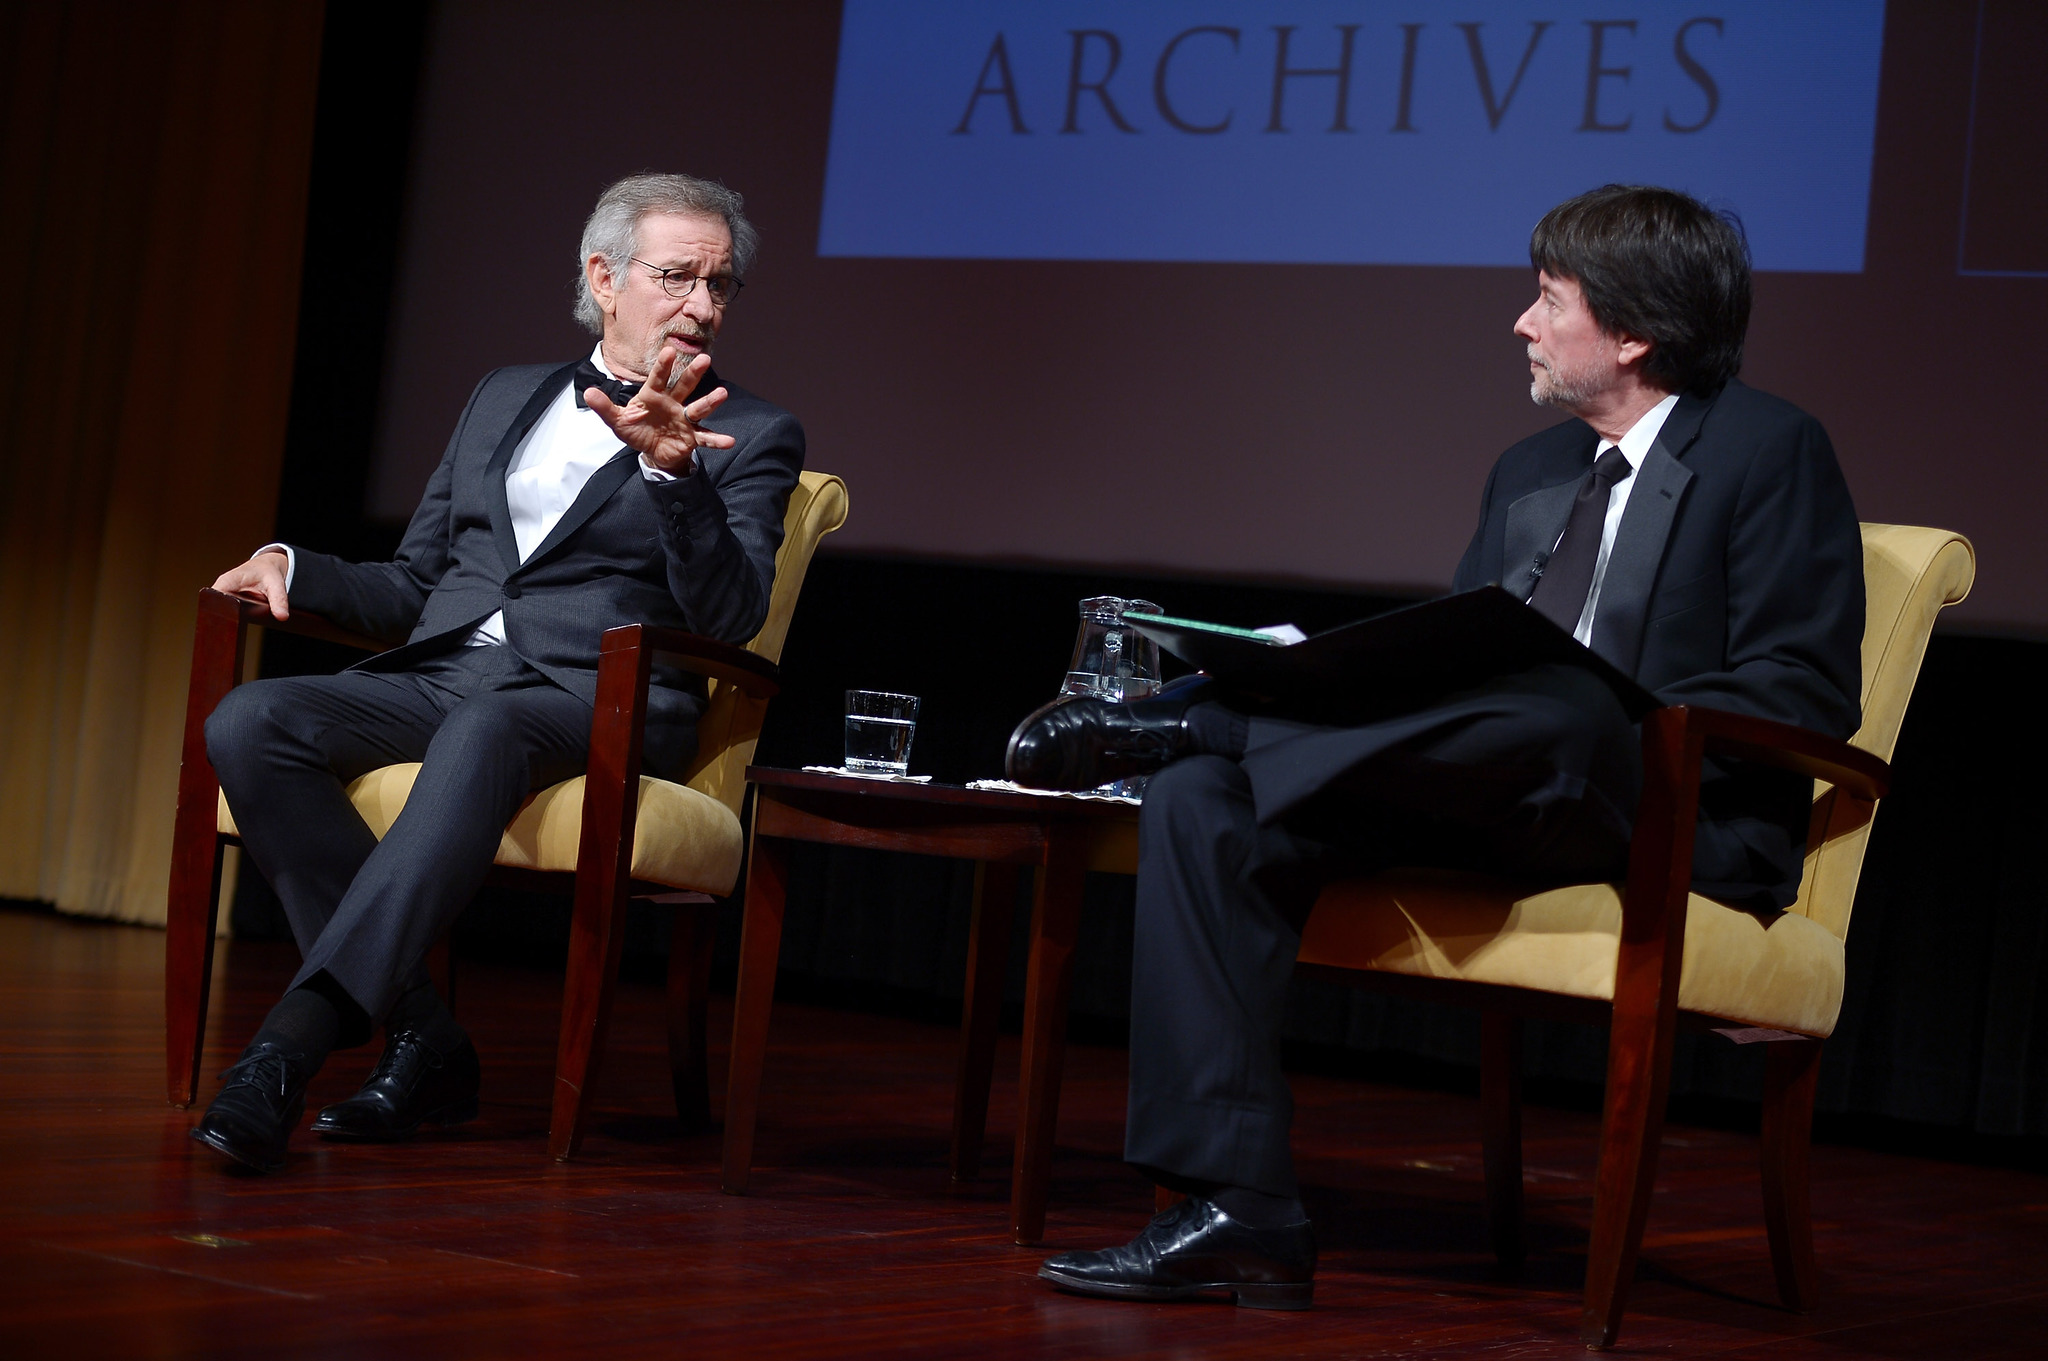 Filmmaker and honoree Steven Spielberg (L) and Foundation for the National Archives Board Vice President and Gala Chair Ken Burns speak onstage at the Foundation for the National Archives 2013 Records of Achievement award ceremony and gala in honor of Steven Spielberg on November 19, 2013 in Washington, D.C.